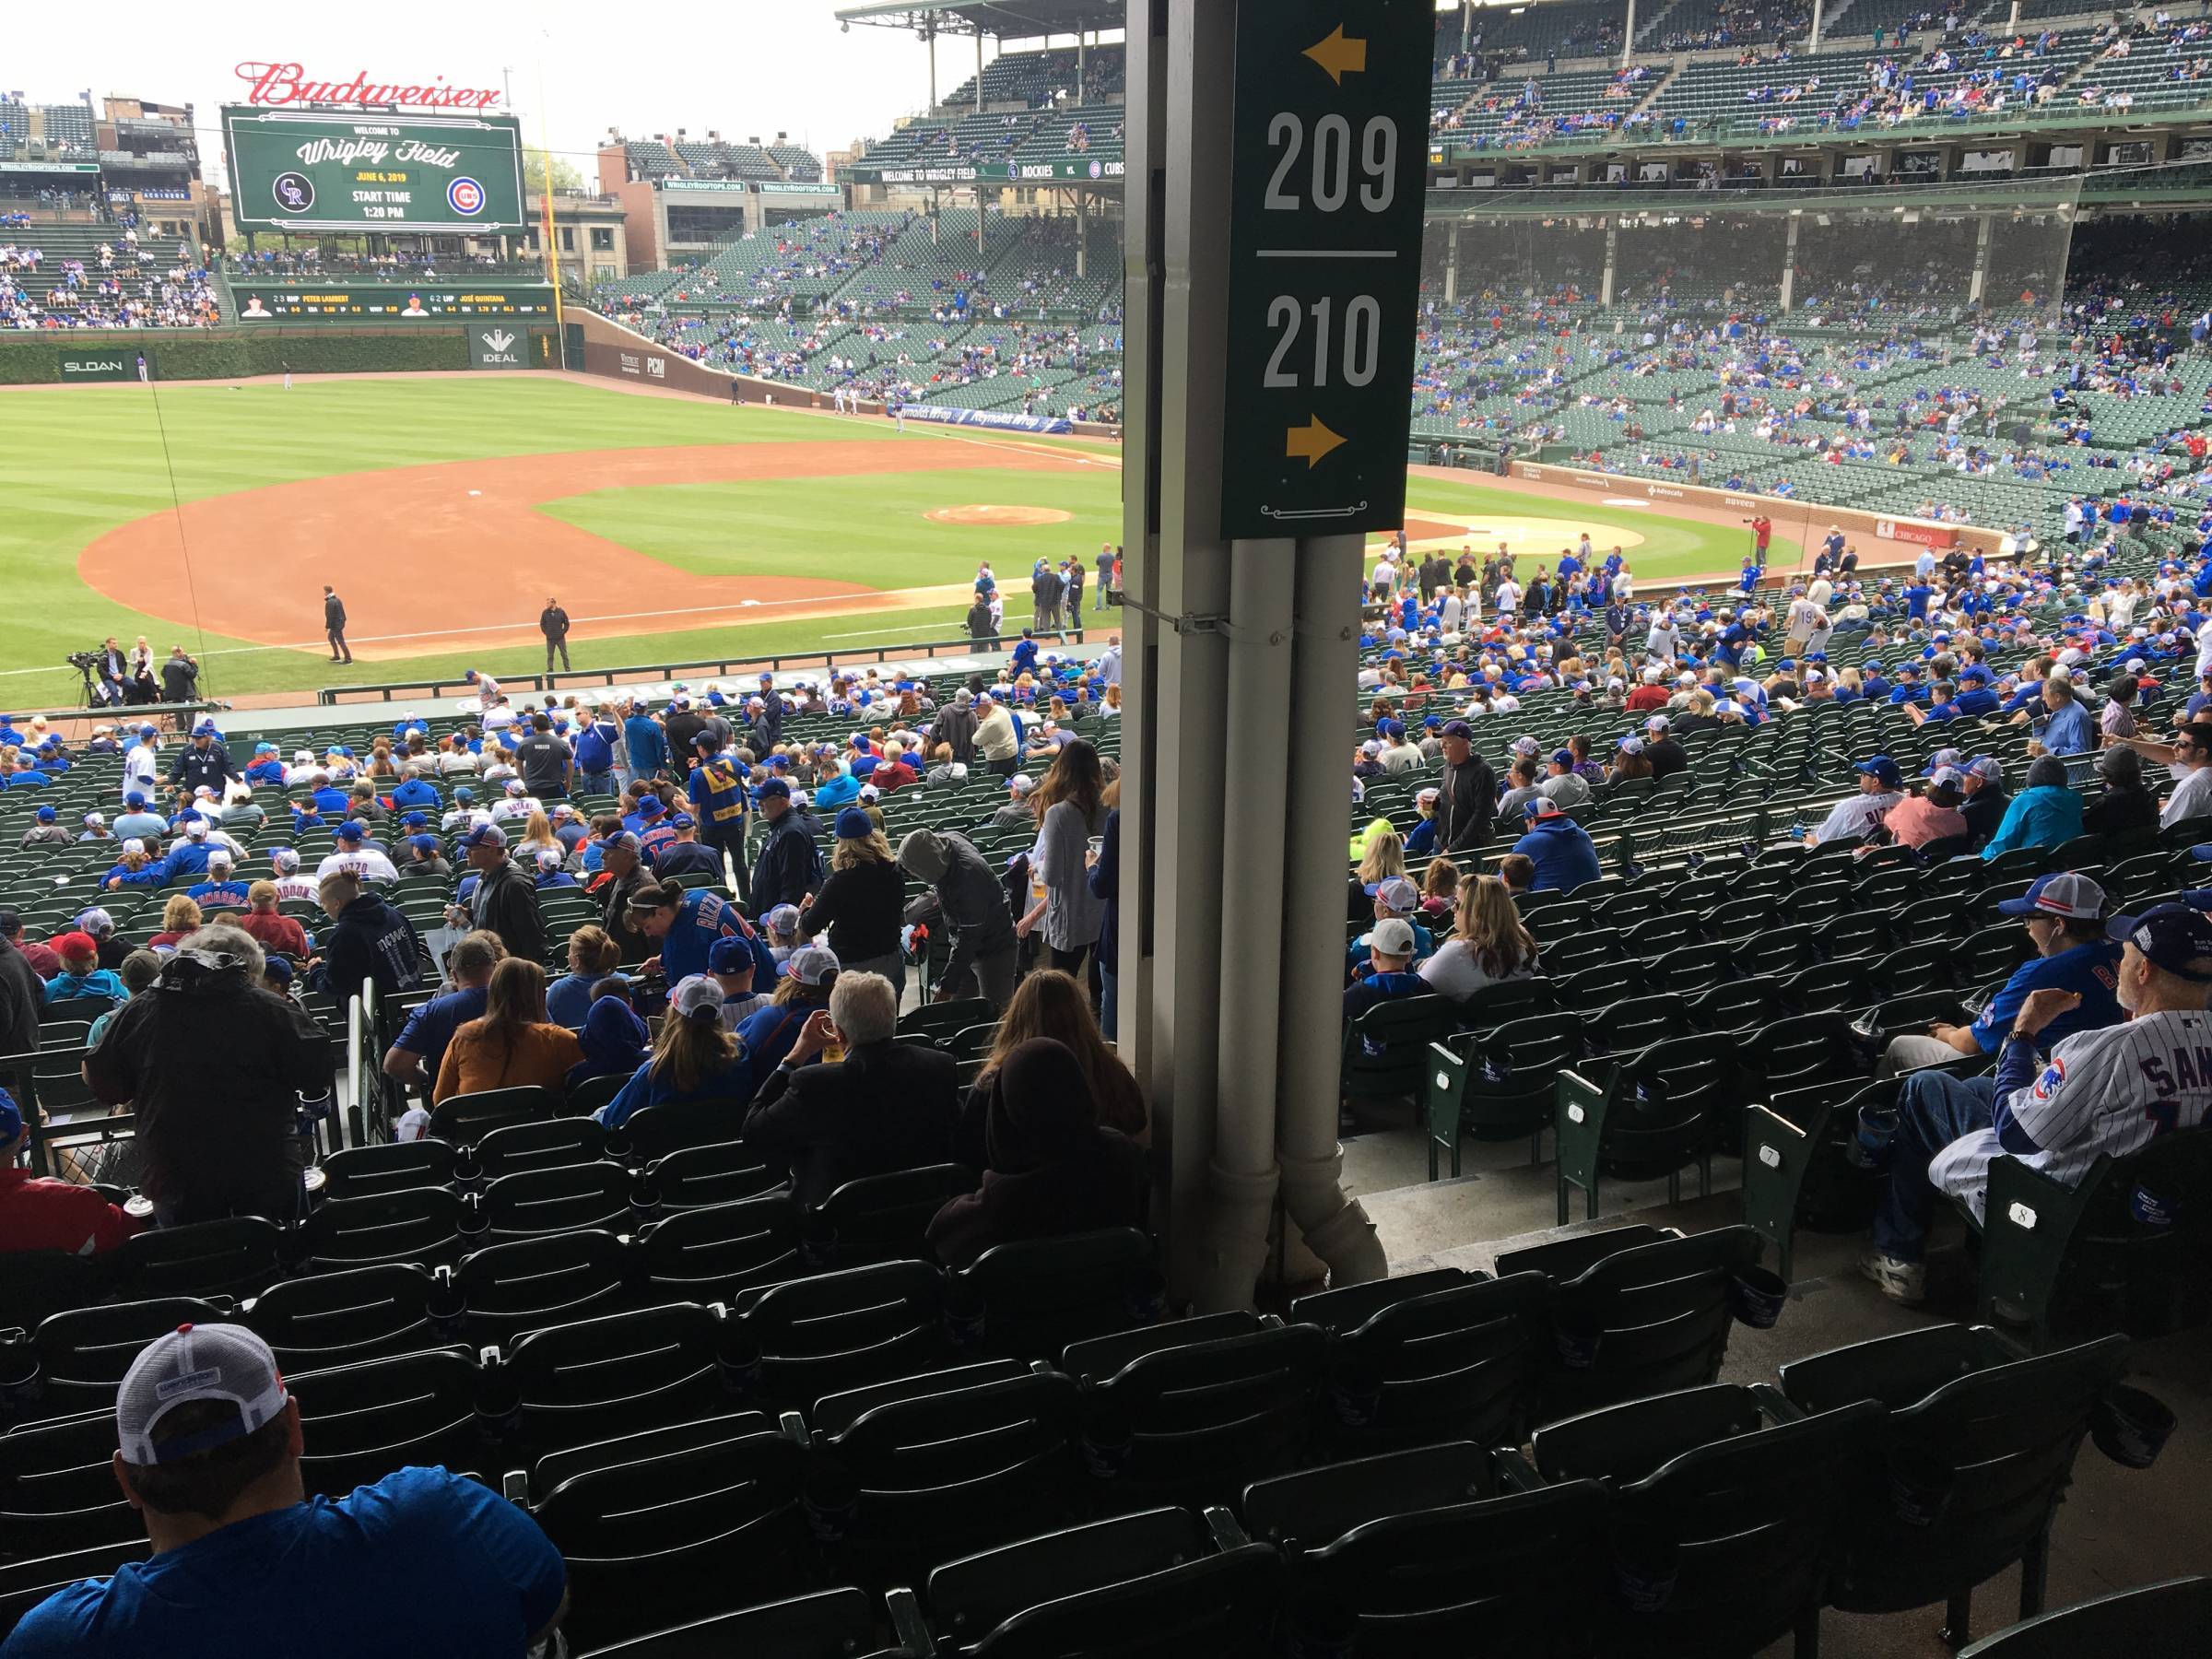 Pole in Section 209 at Wrigley Field